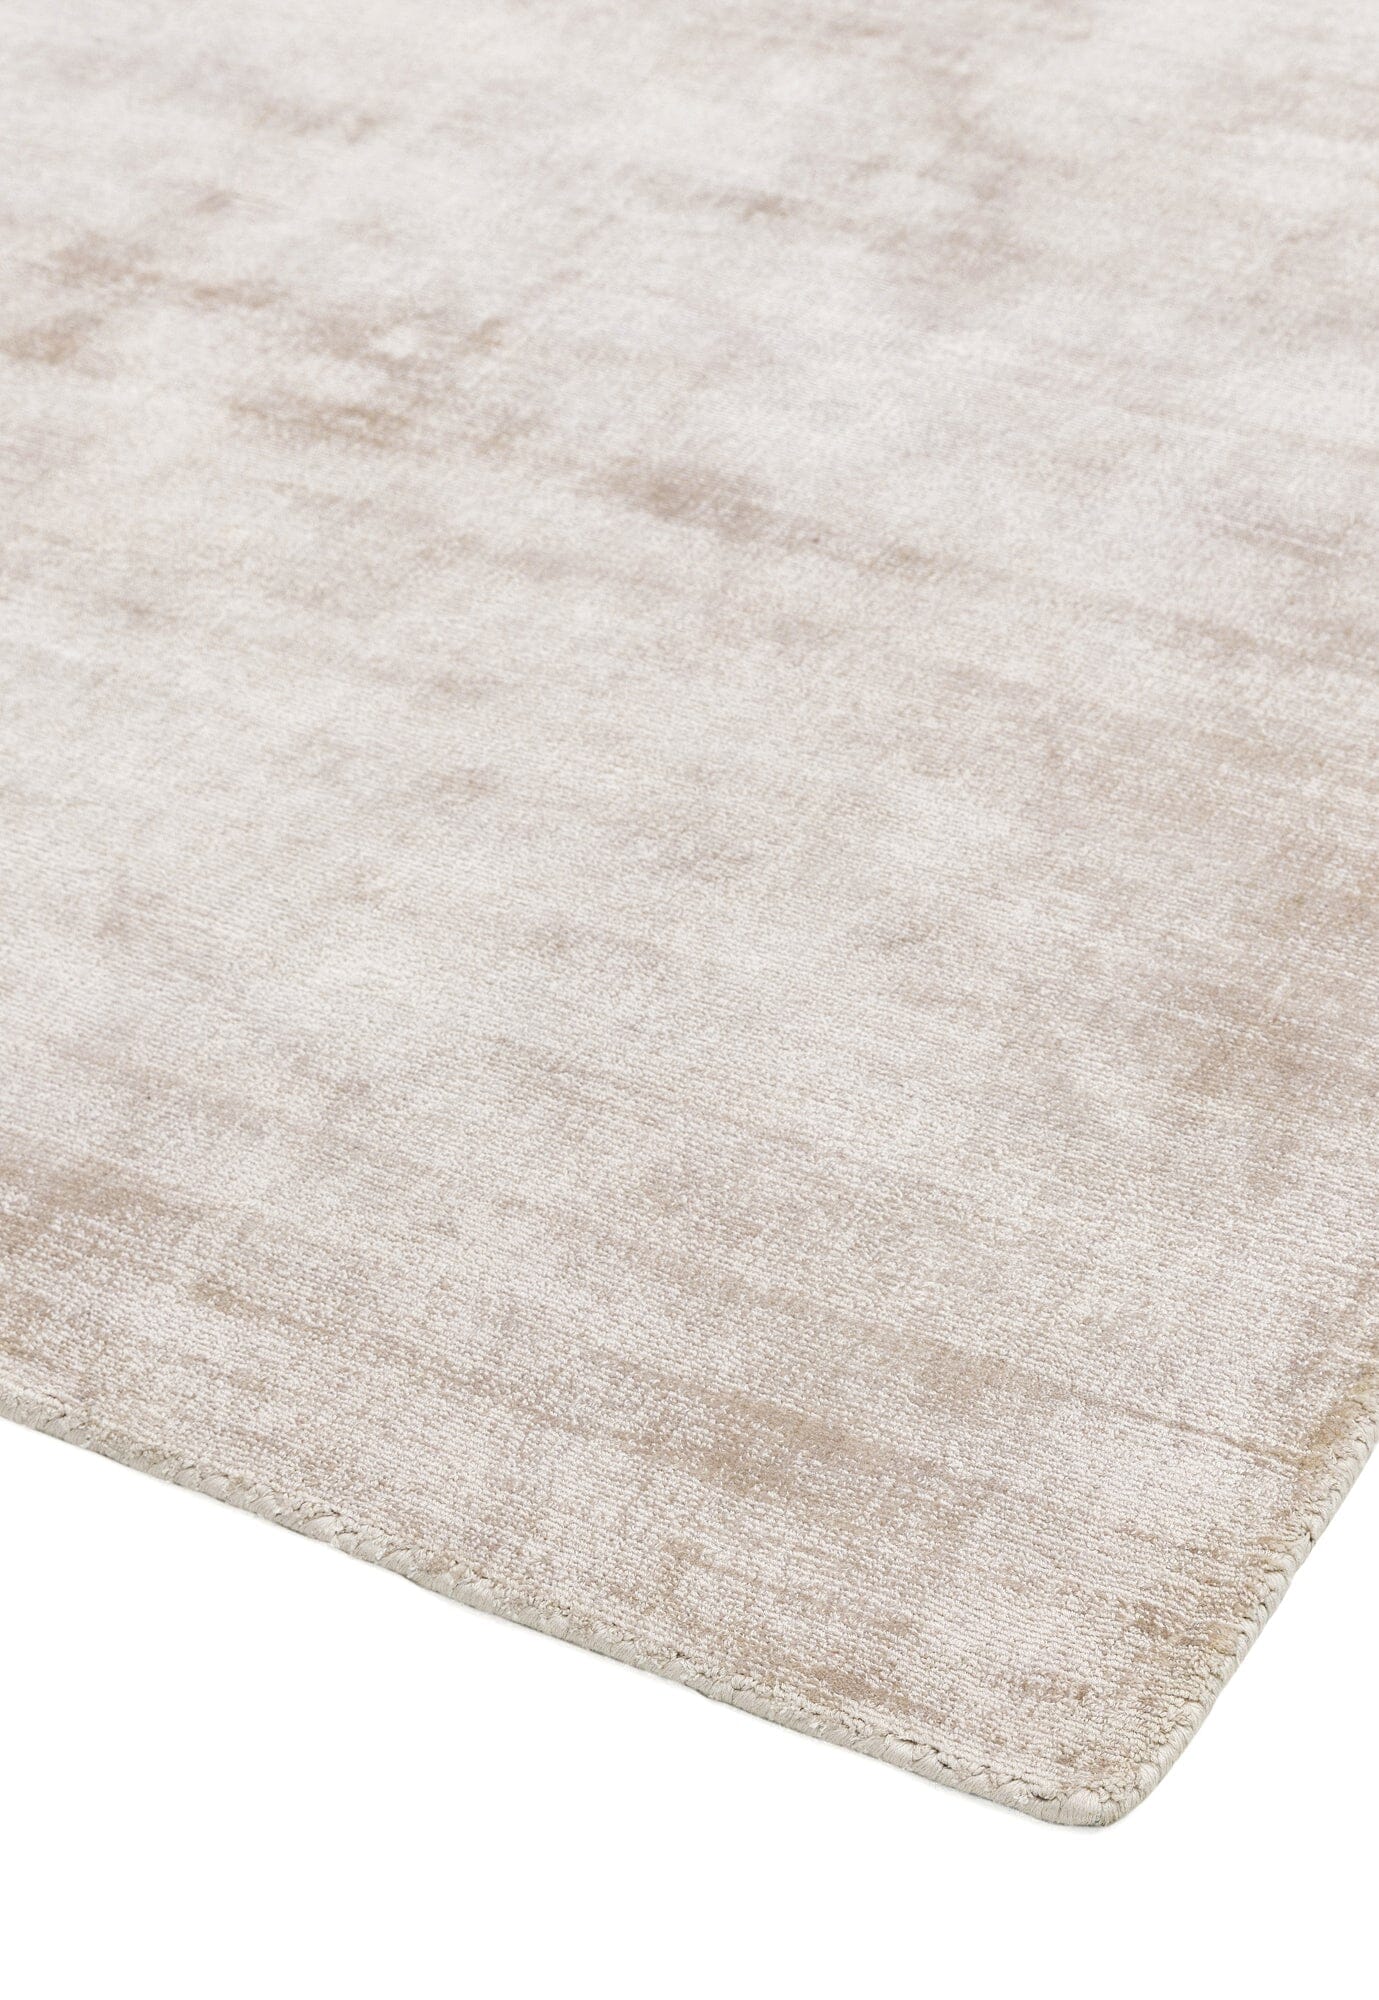 Asiatic Carpets Blade Hand Woven Rug Putty - 120 x 170cm